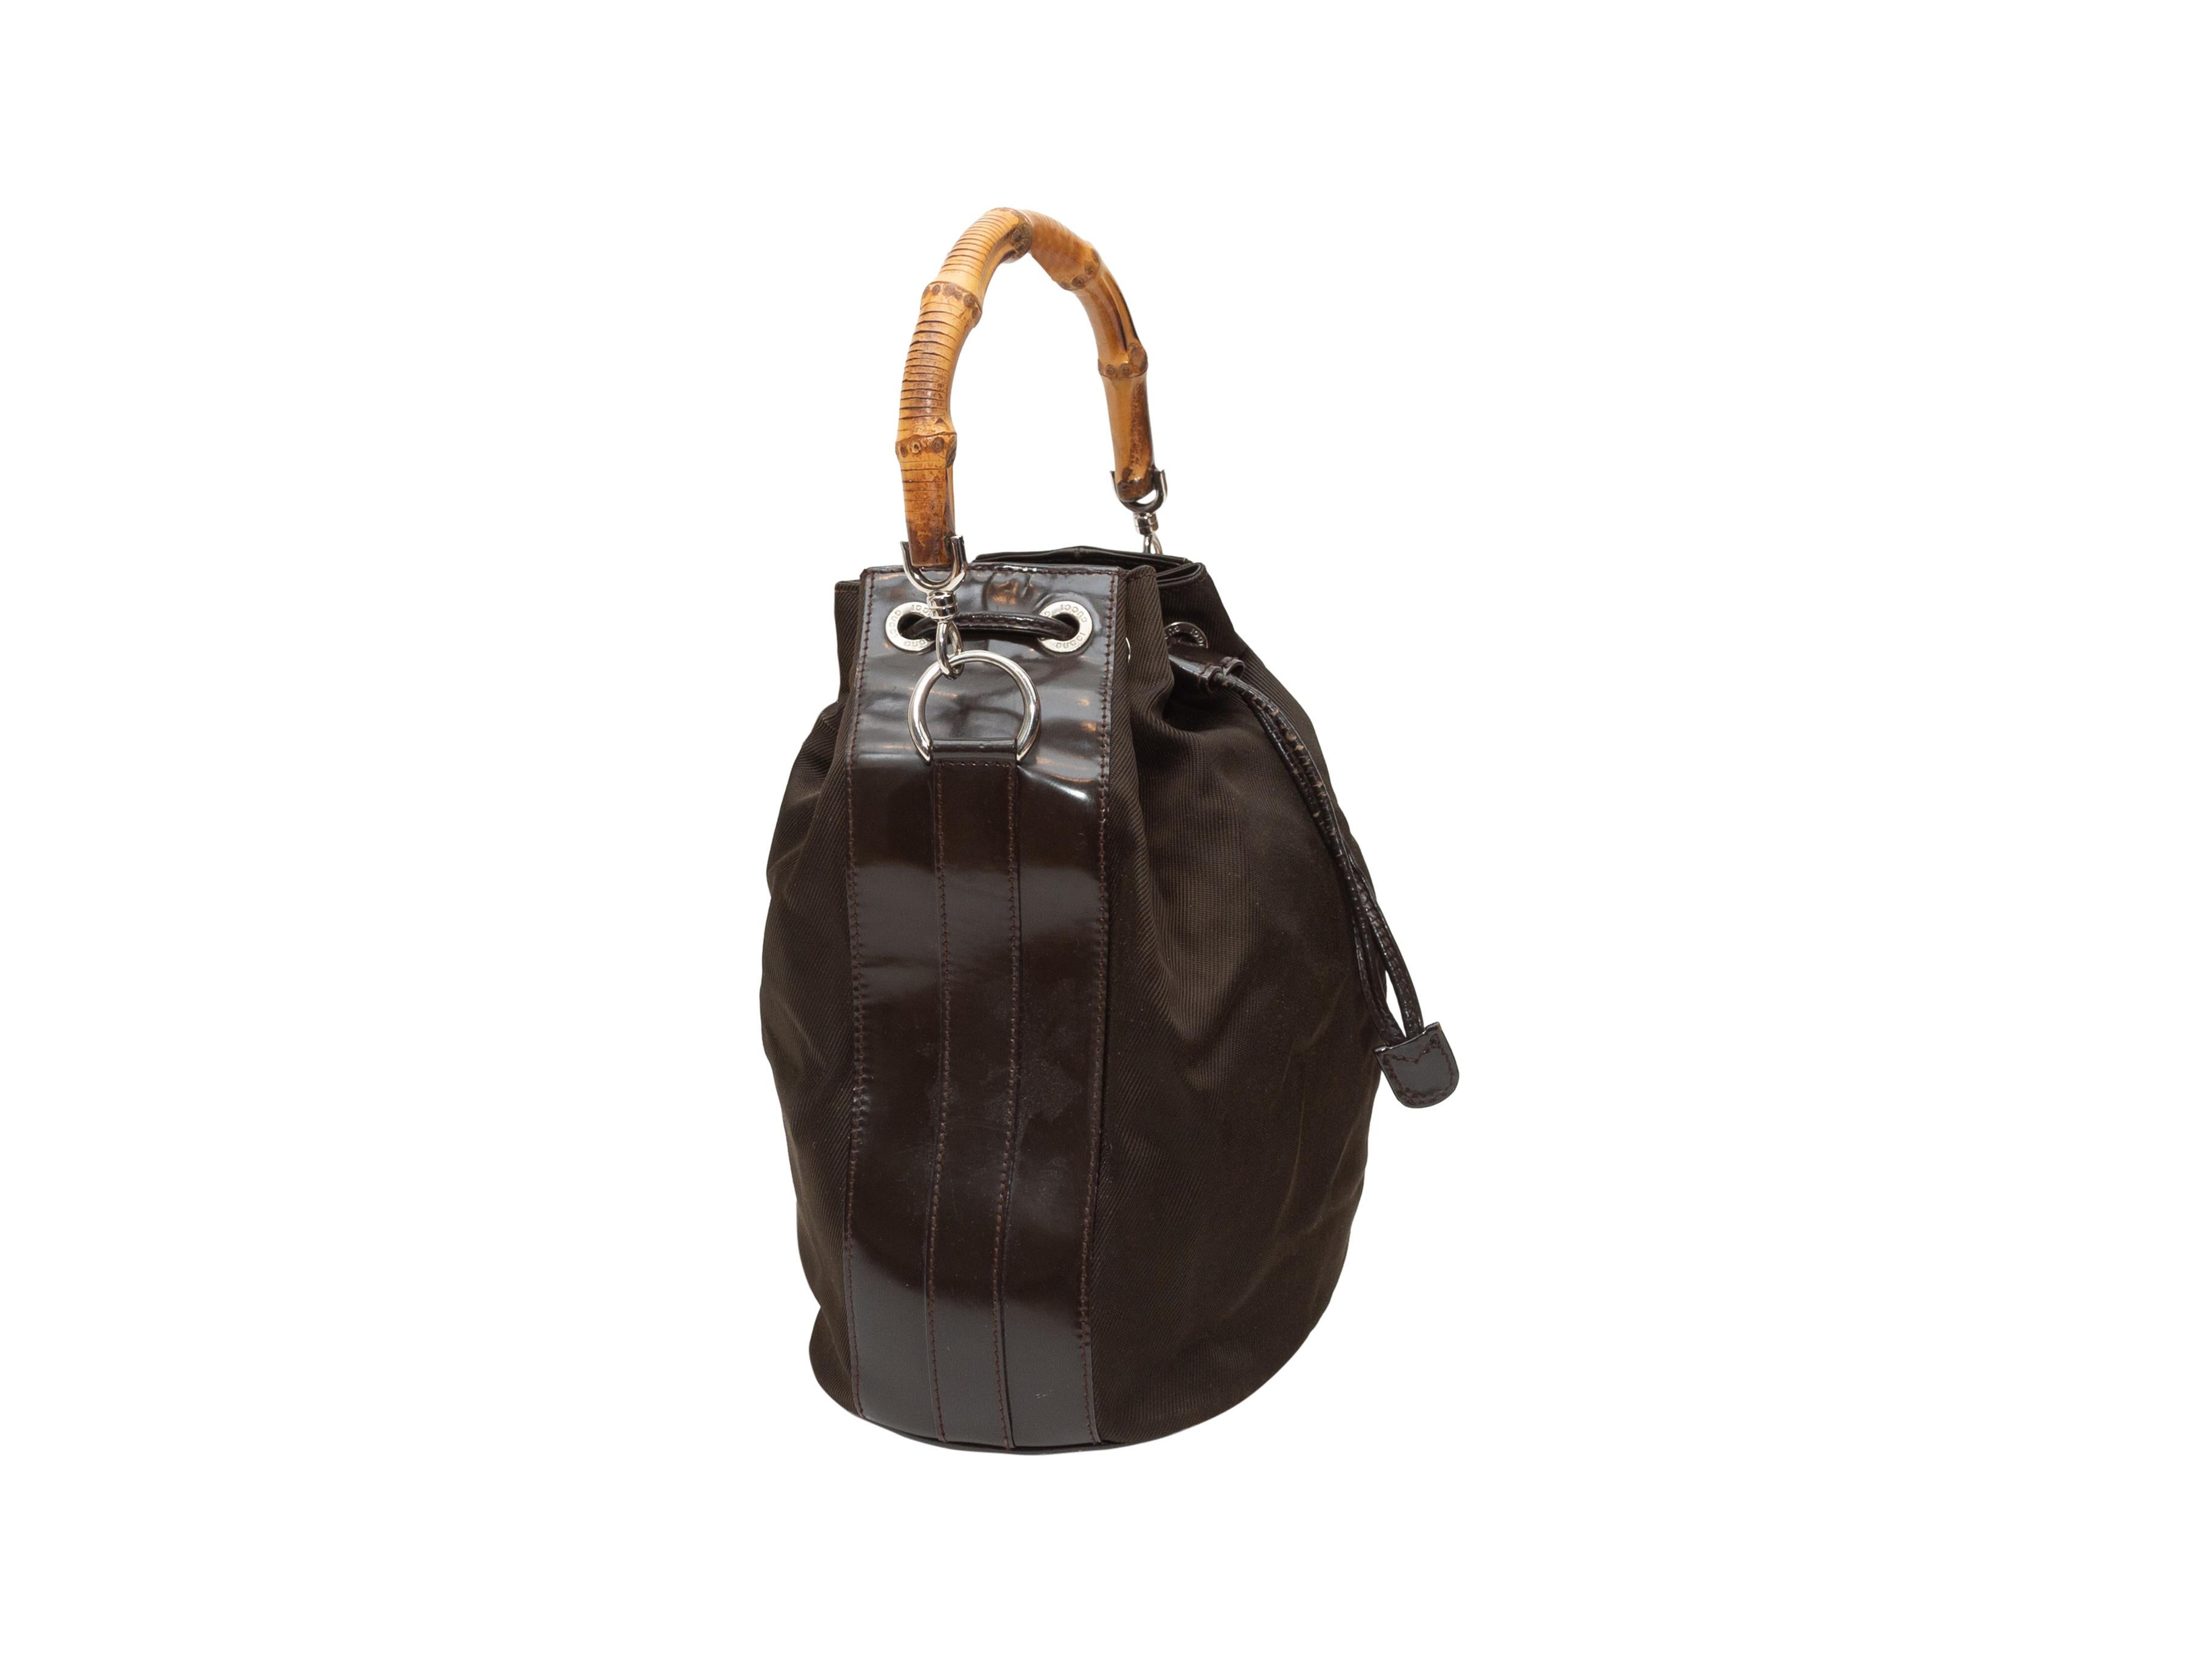 Product details: Vintage brown nylon bucket bag by Gucci. Leather trim throughout. Silver-tone hardware. Bamboo top handle. Optional shoulder strap. Drawstring closure at top. 10